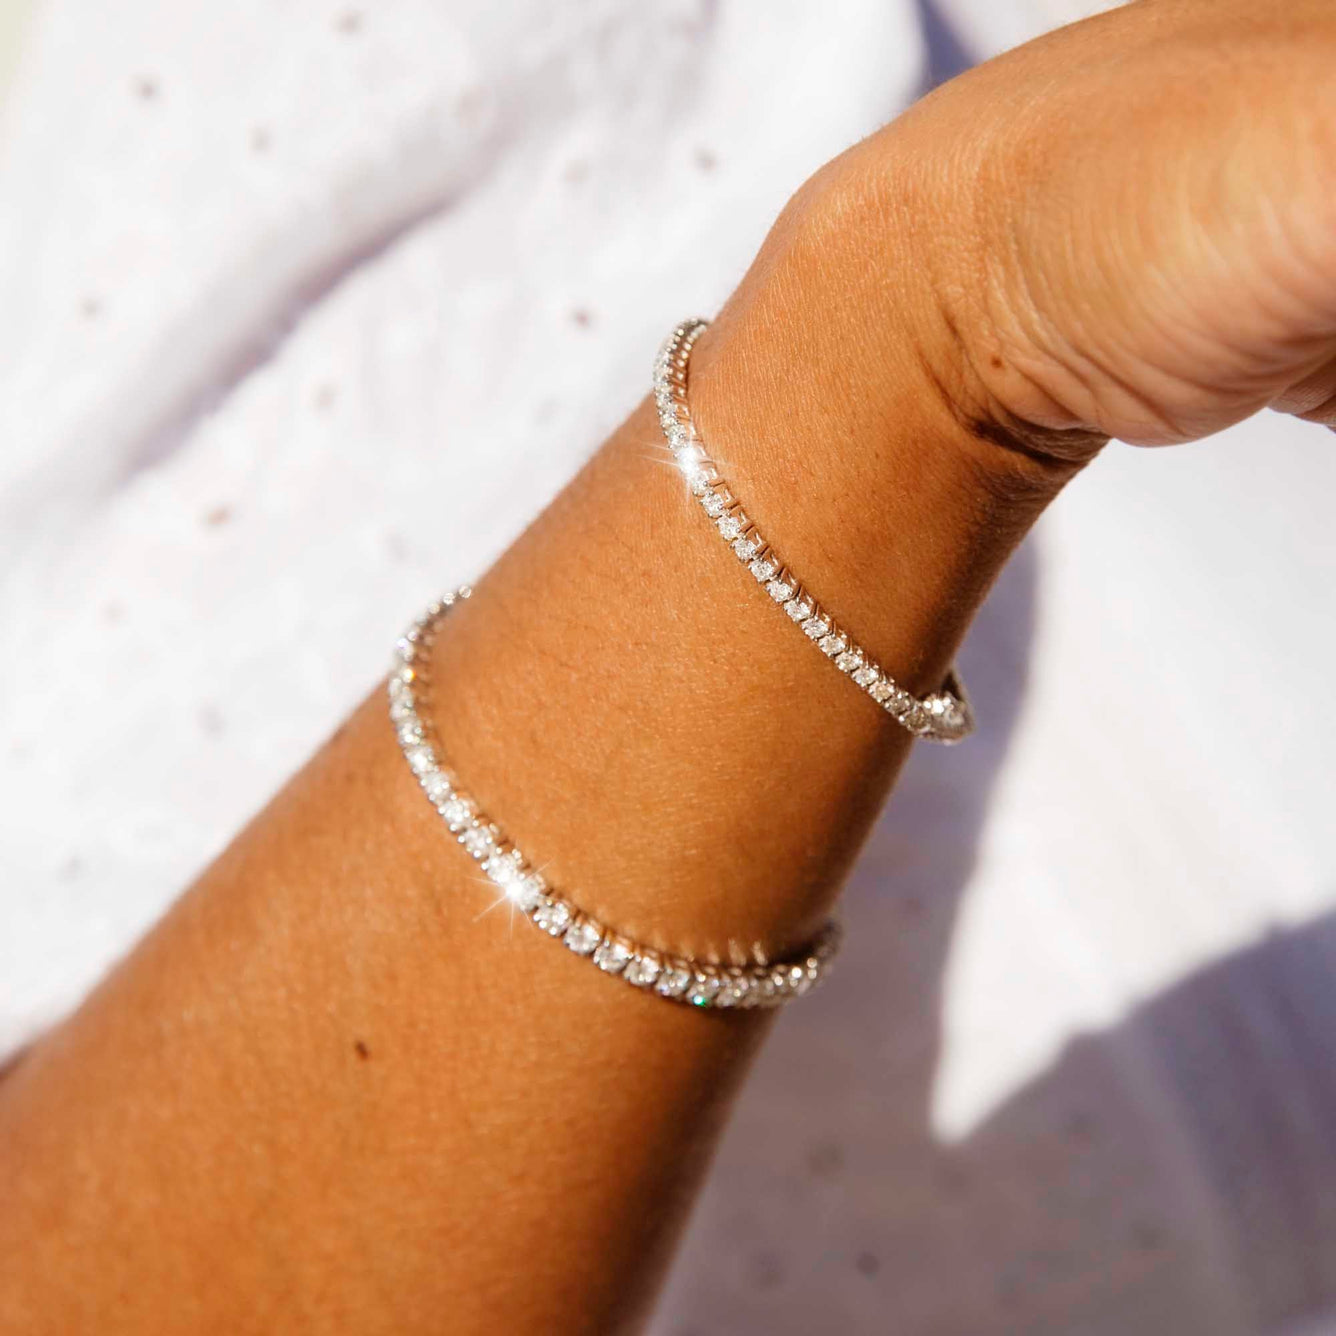 Wimbledon Special: The History of Tennis Bracelets